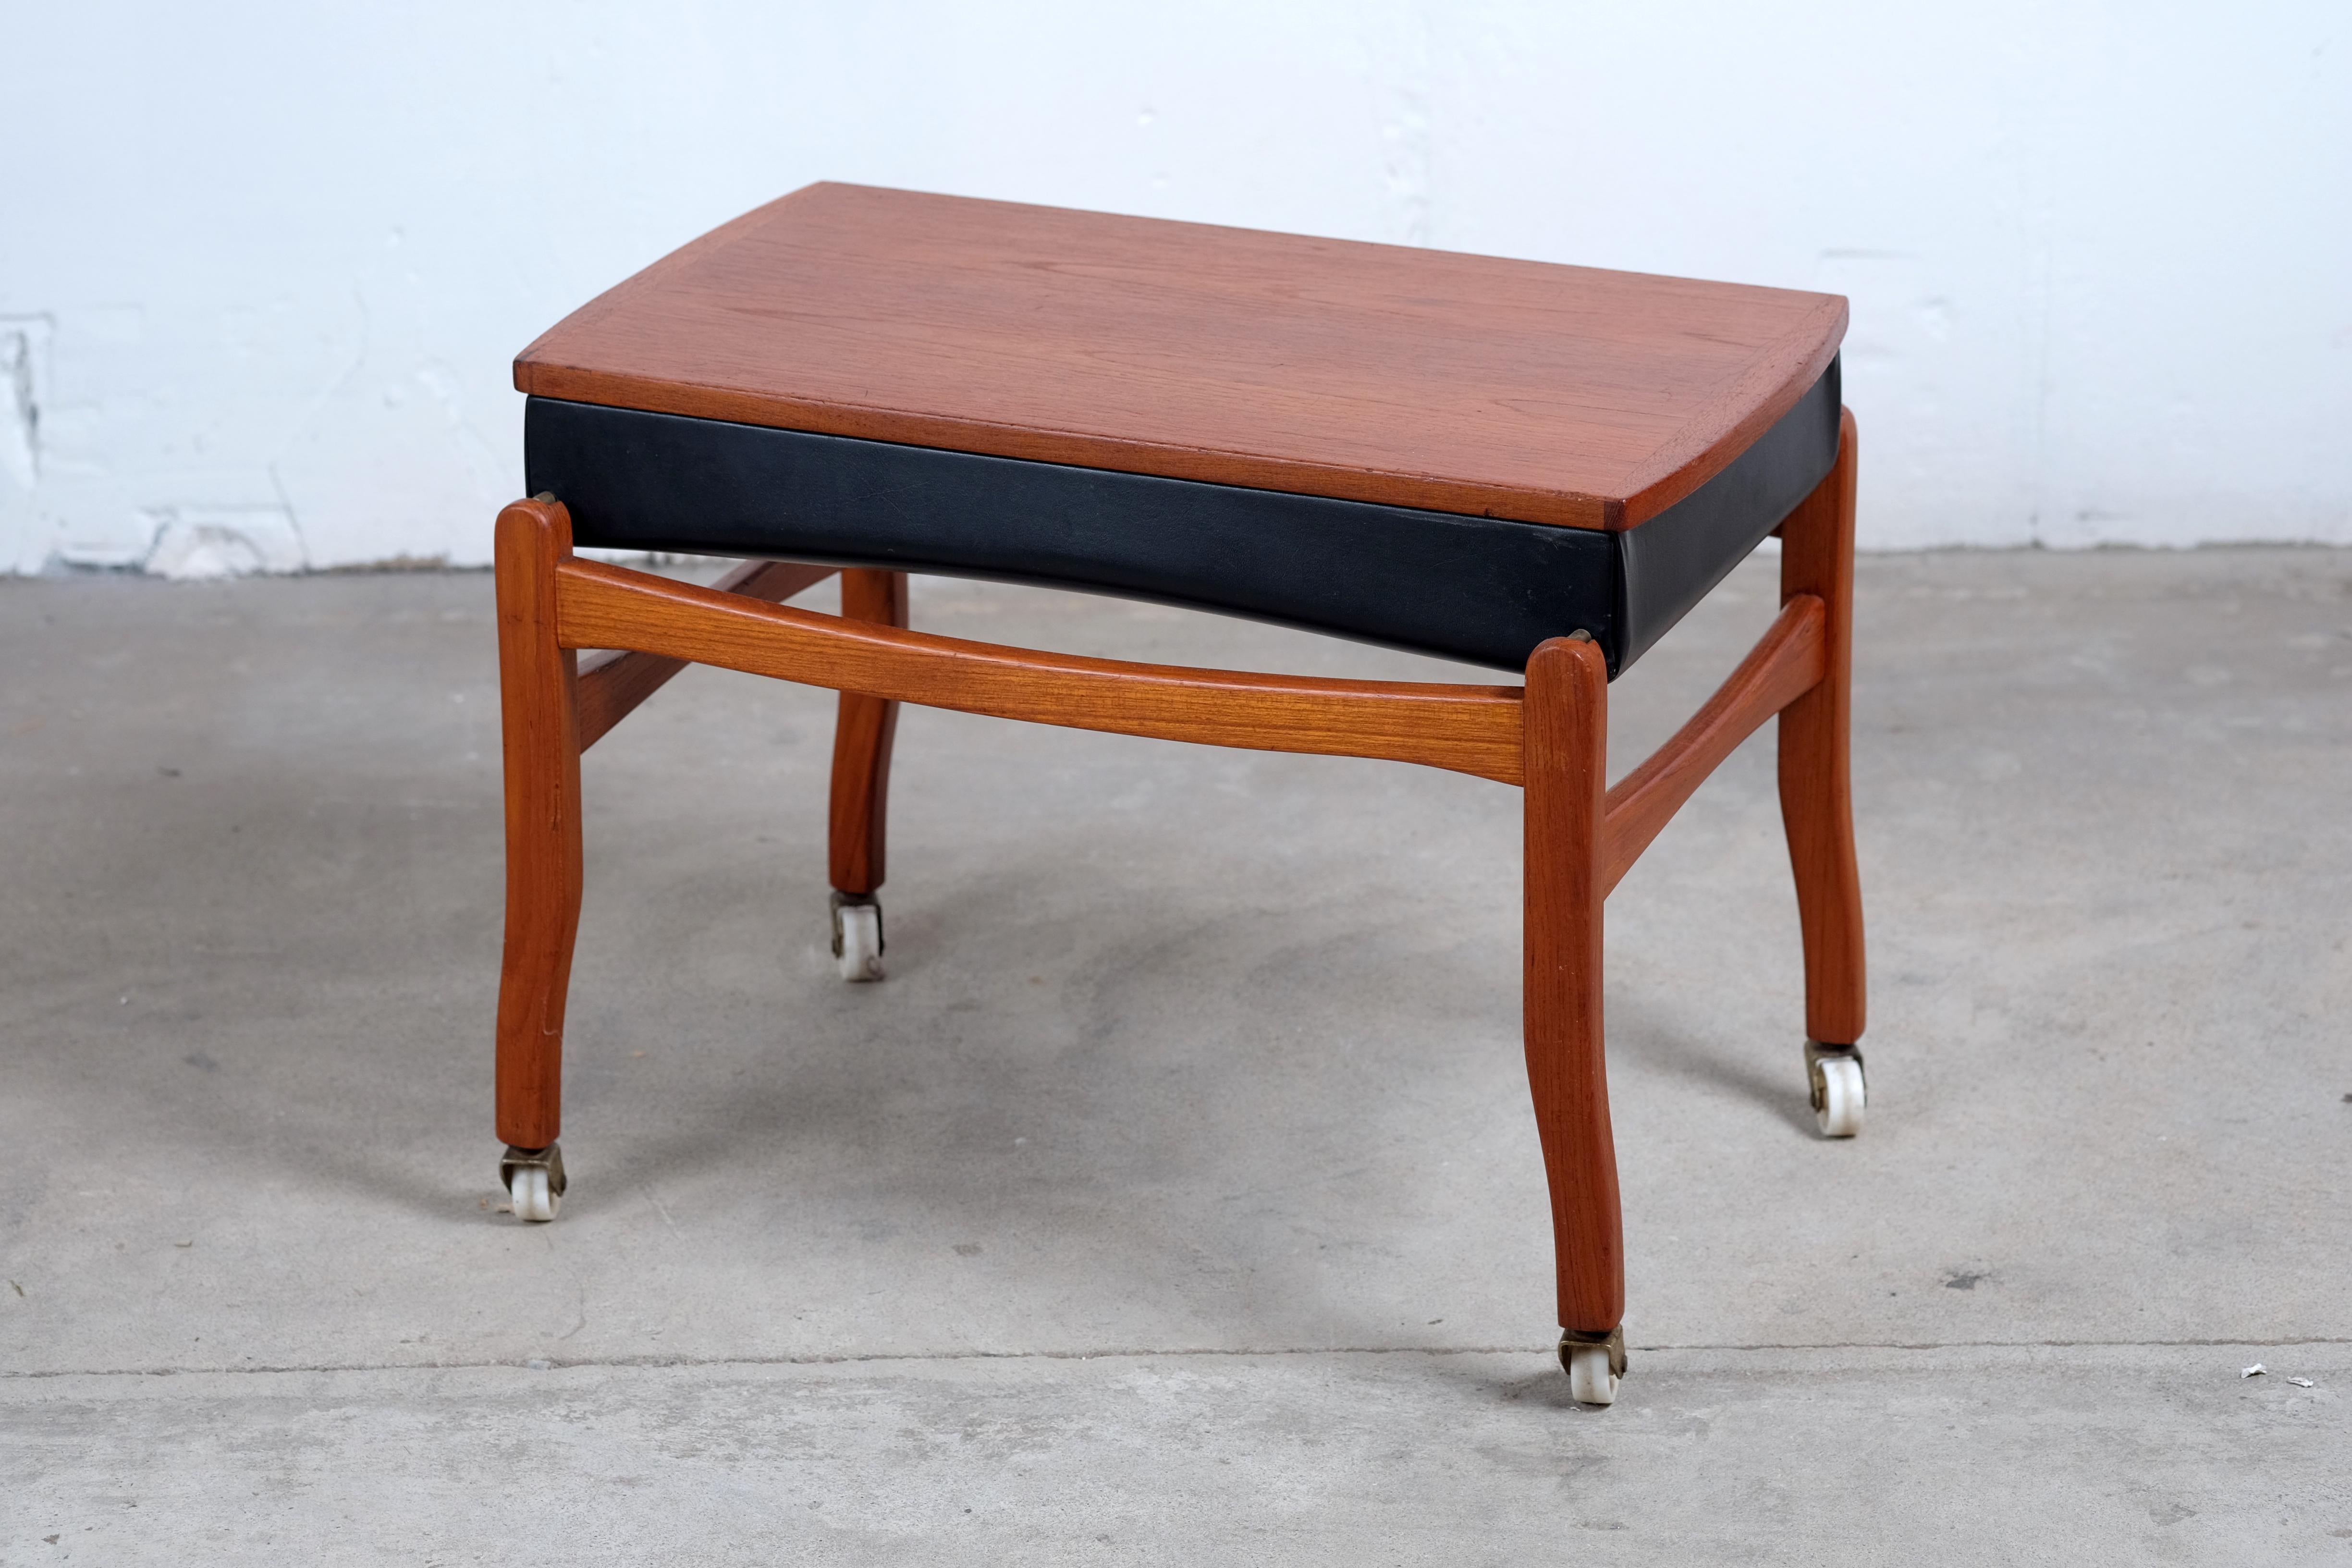 Danish midcentury stool in teak with seat in skai.
The wheels make the stool easy to move around with.
A great detail is that you can turn around the seat and it will act like a coffee table. The stool has some age related wear because of use. But